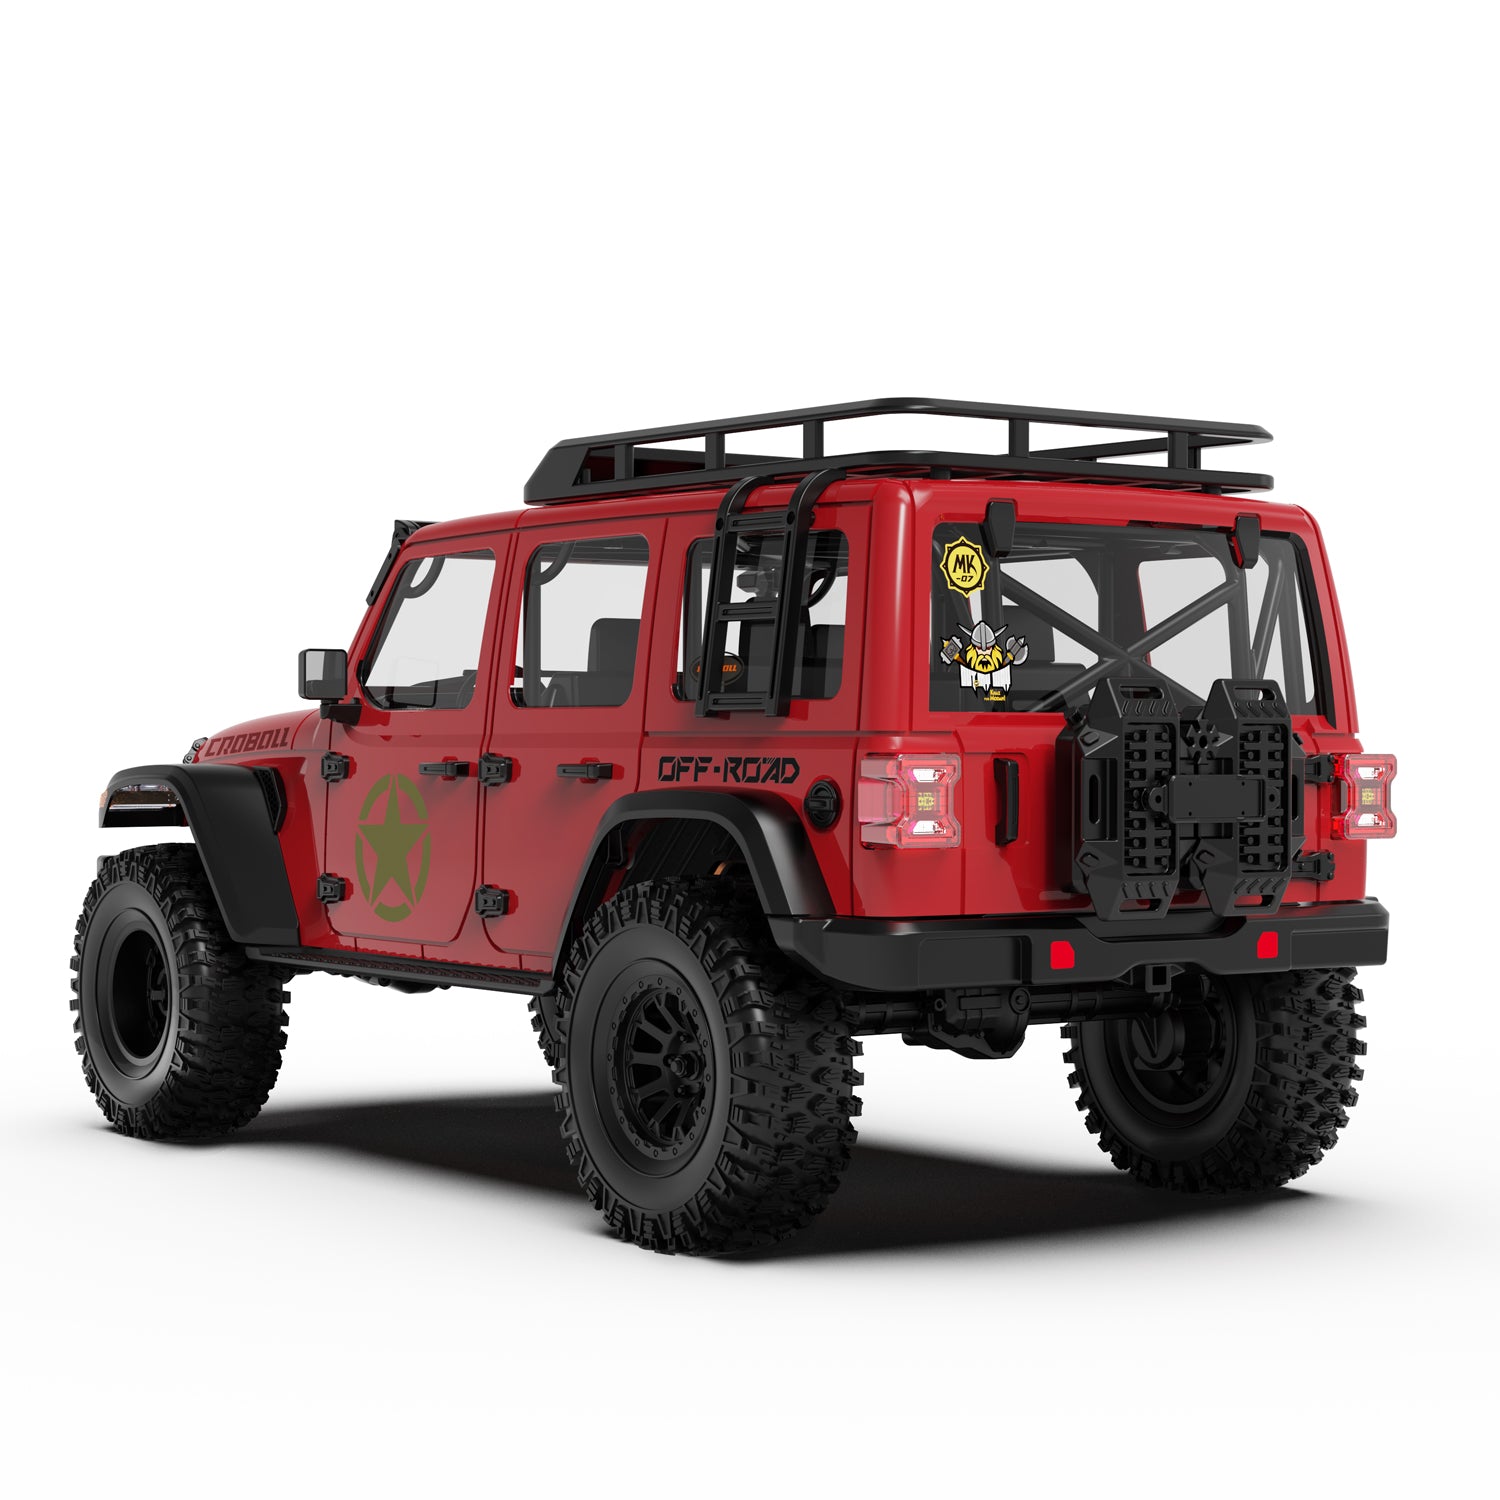 1/7 Scale 4WD Brushed RC Crawler MK-07 Red